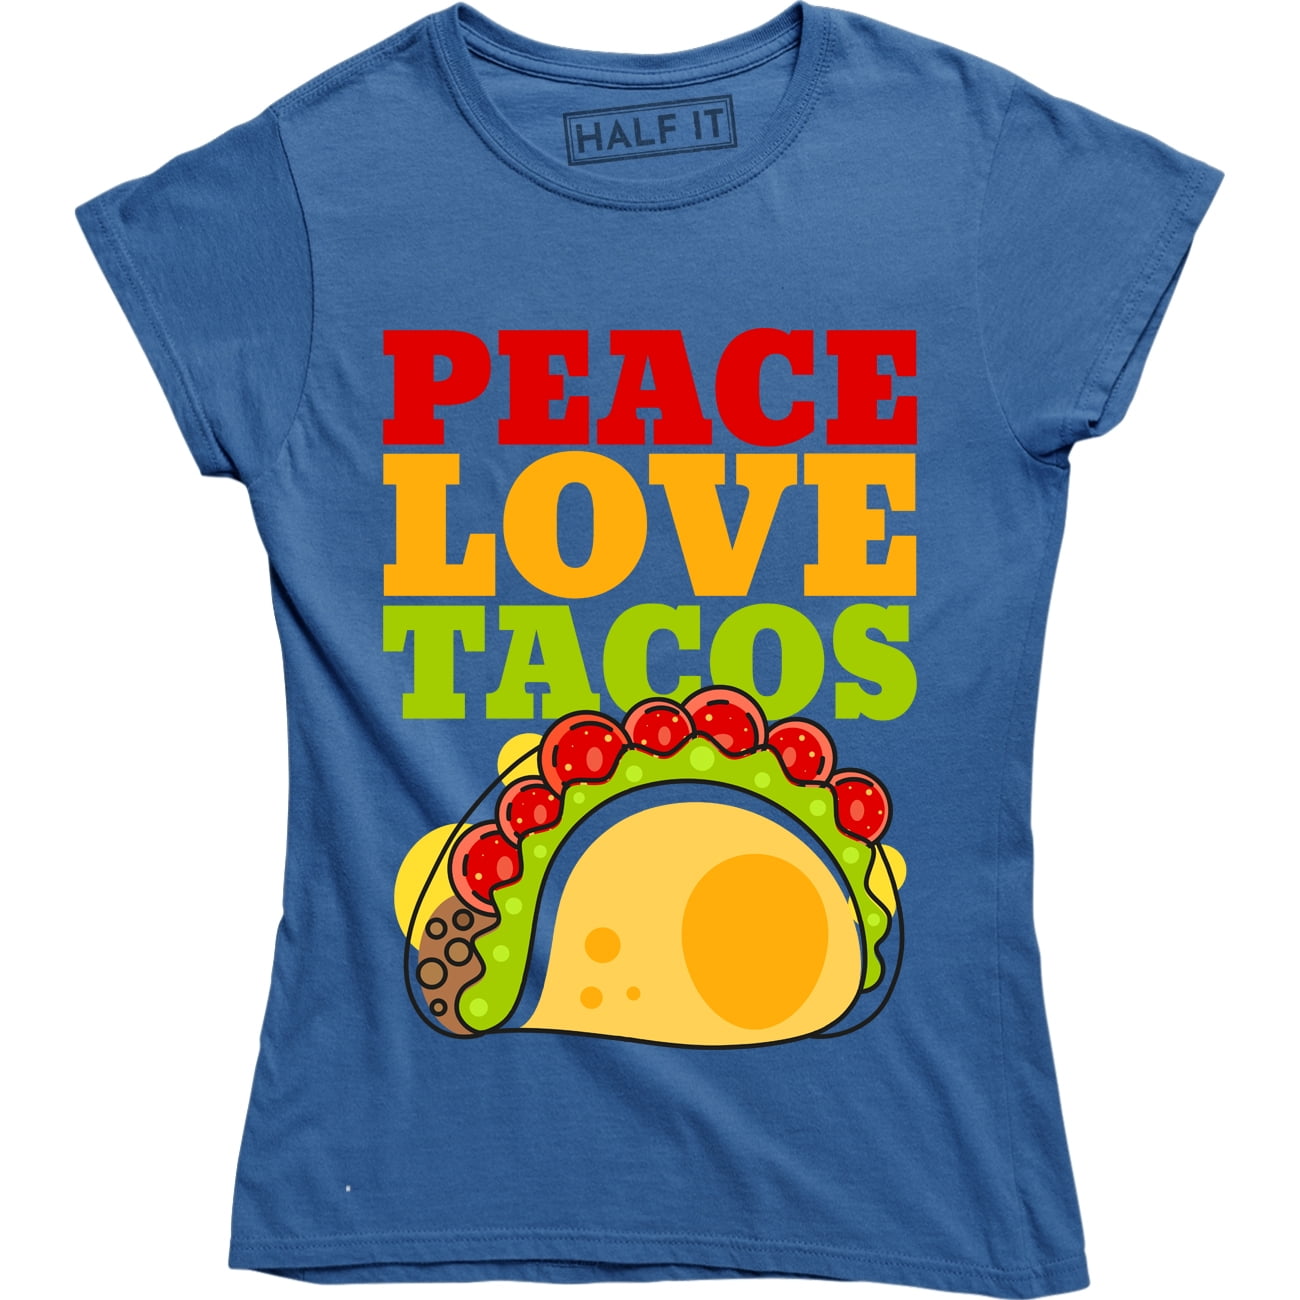 This Is My Taco Eating Shirt Tacos Fast Food Lover Kawaii Cute Cinco De Mayo Mexican Food Foodie Funny Pun Gift Short-Sleeve Unisex T-Shirt